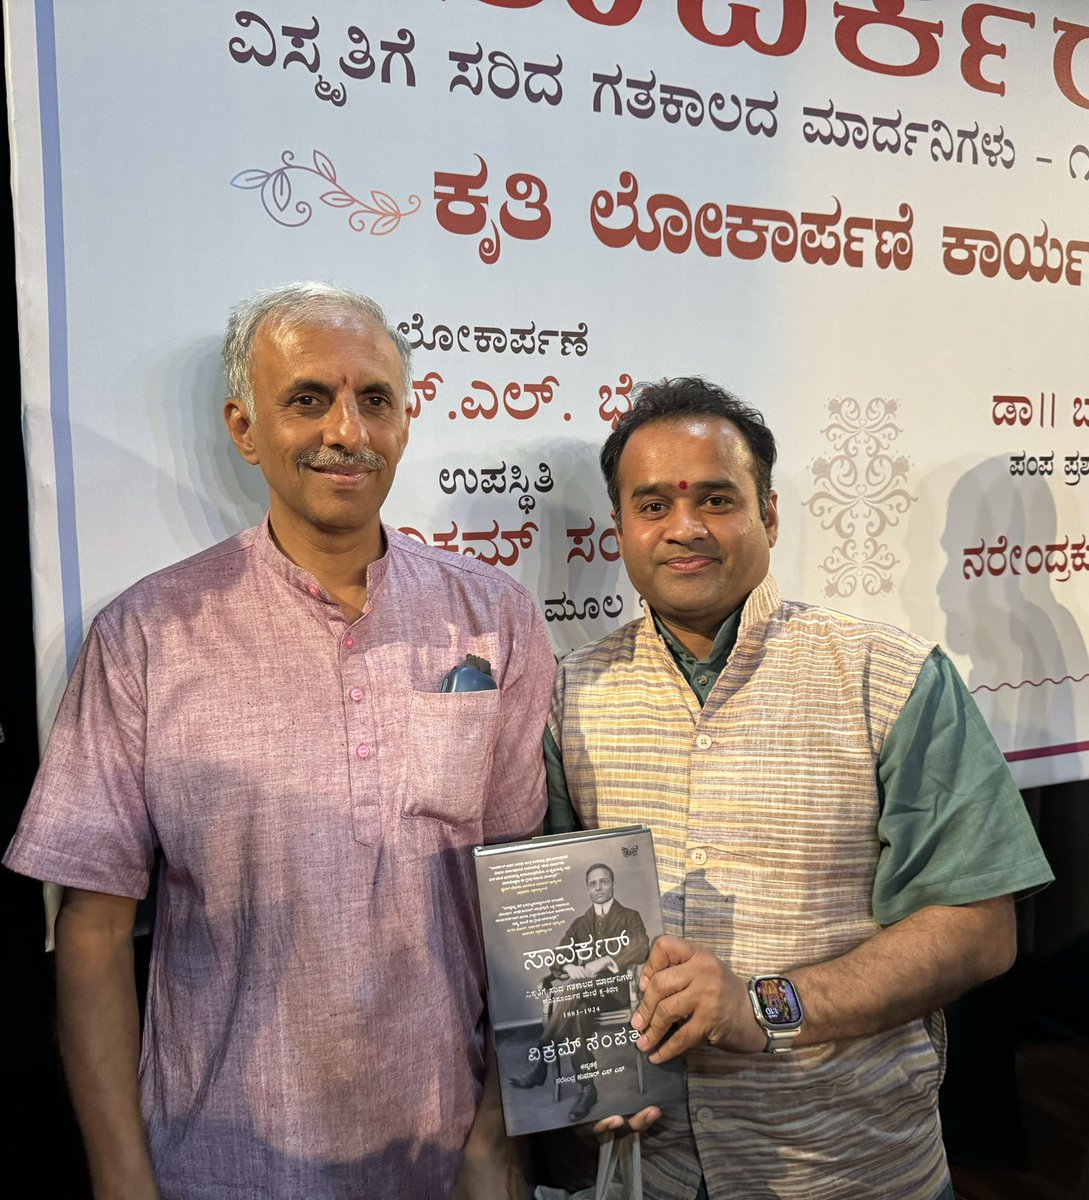 It was great meeting you Dr @vikramsampath Sir 🙏😊
At the book launch of Dr. Vikram Sampath's Kannada translation of Savarkar Volume 1: today morning at 10 am at the Indian Institute of World Culture. In the Presence of Dr. #SLBhyrappa Sir 🙏
#VeerSavarakar